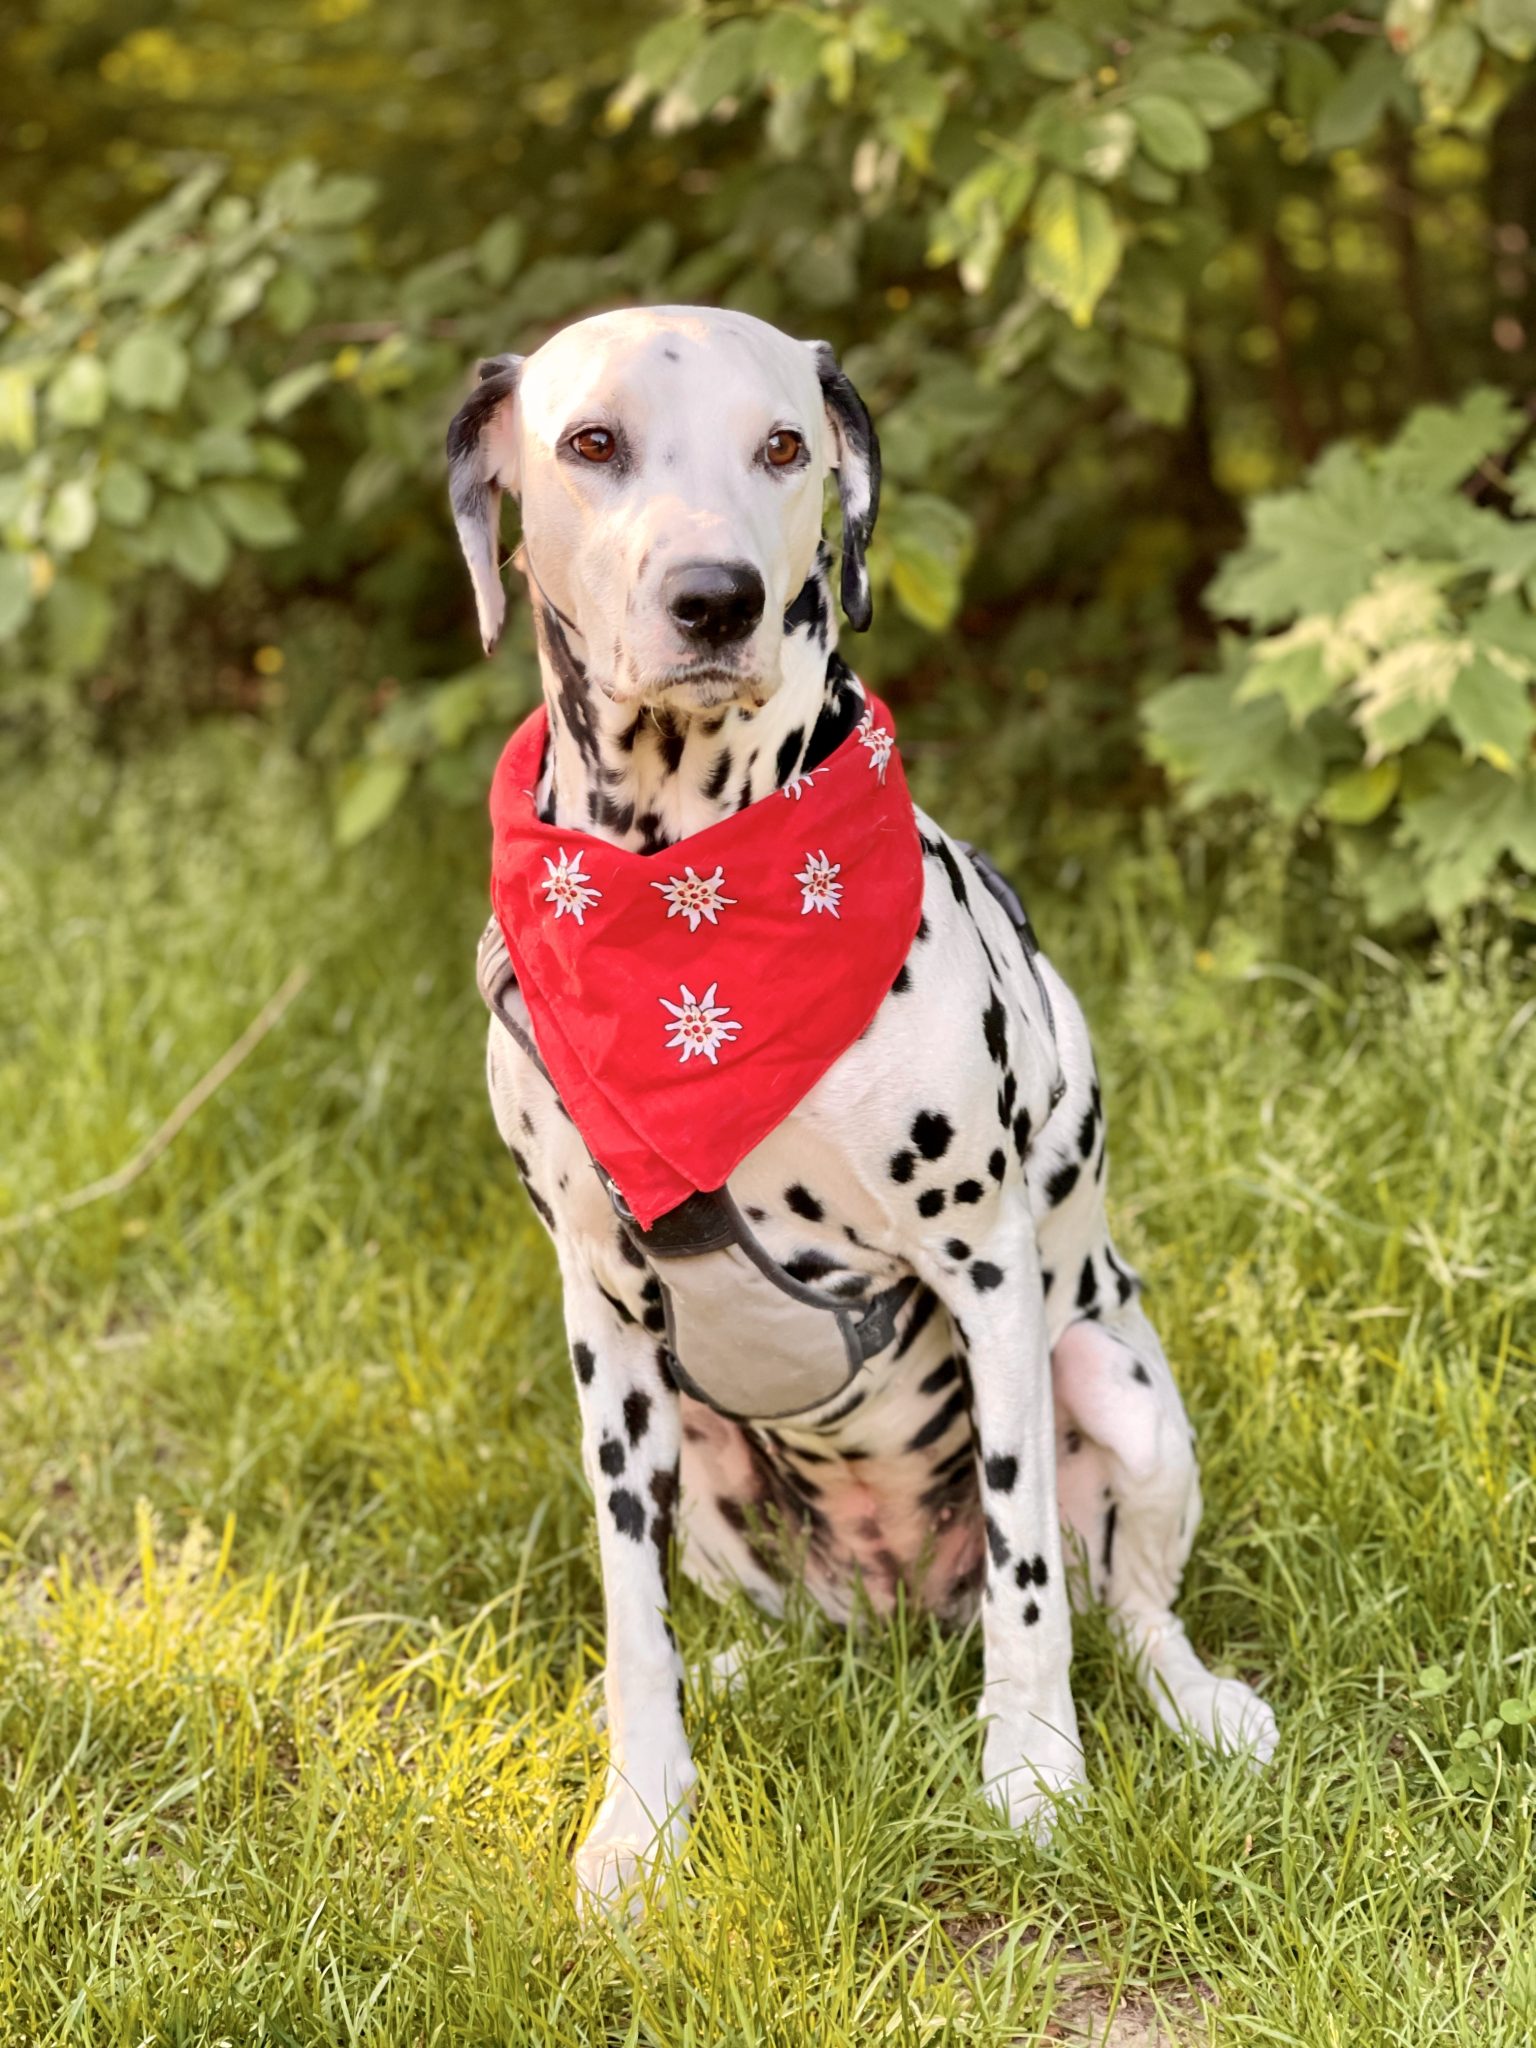 A dalmatian dog called Emma sitting in nature, wearing a bavarian red scarf.